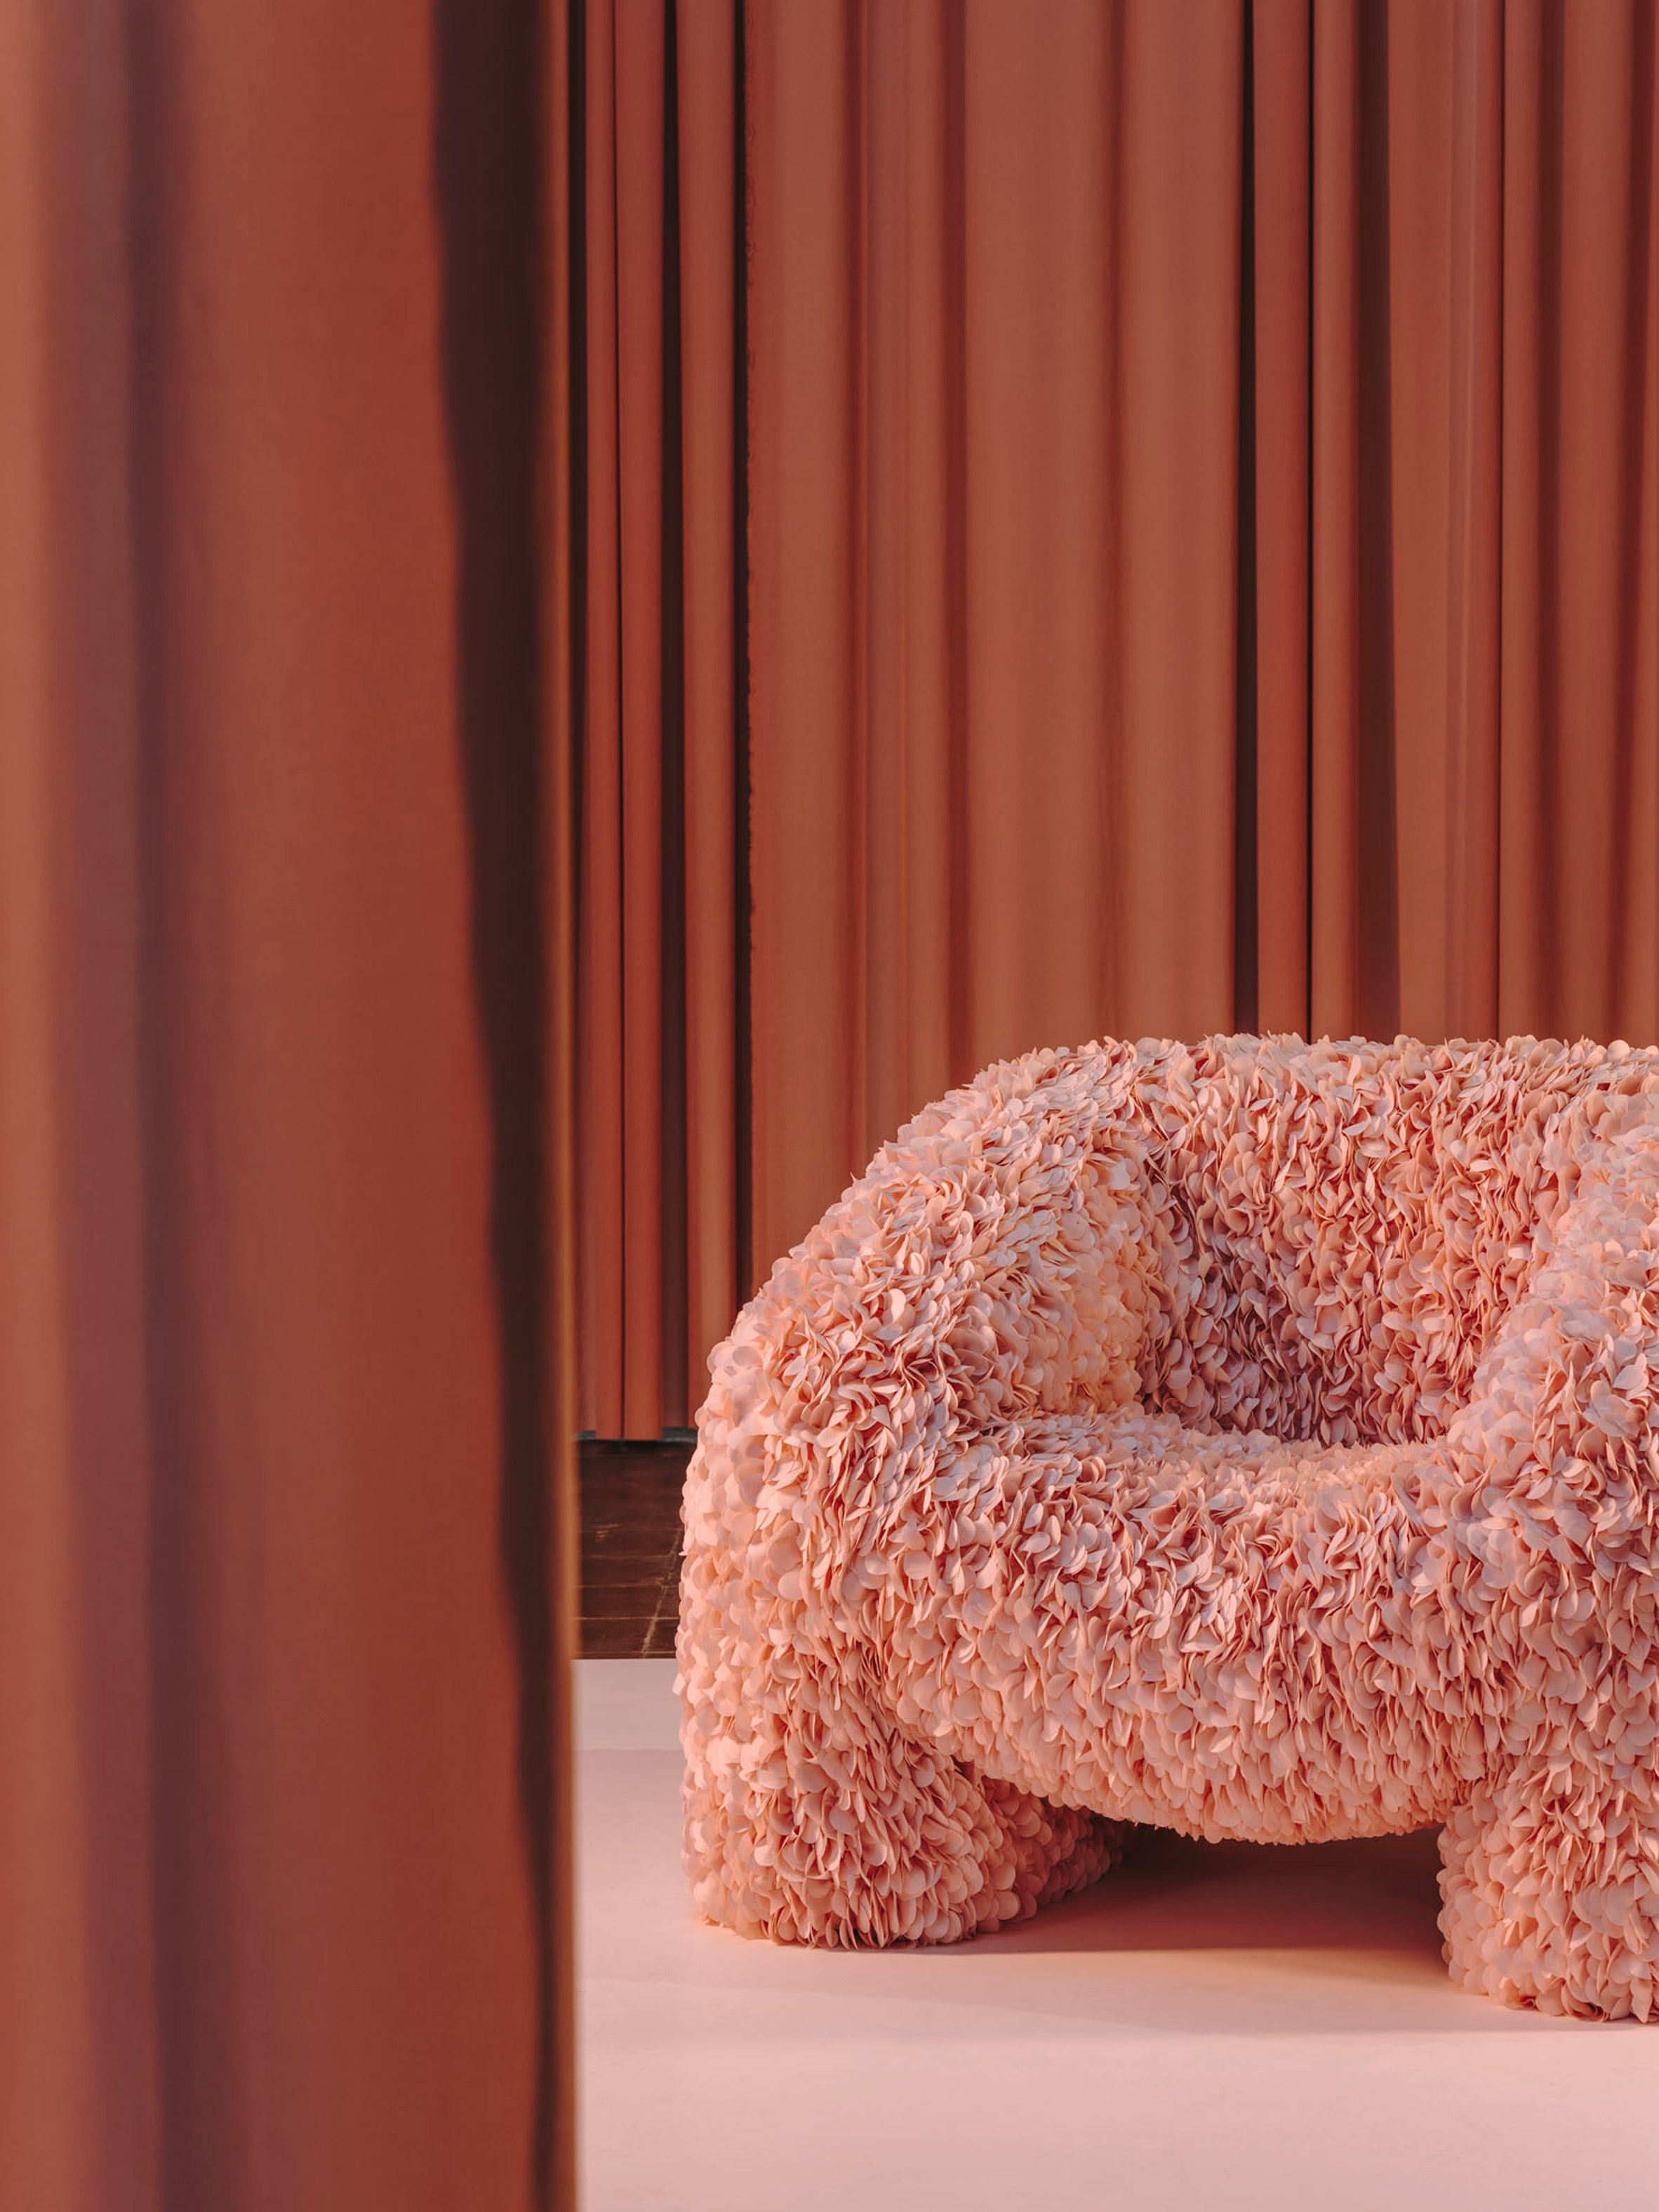 Andrés Reisinger turns Insta-famous CGI render into real chair